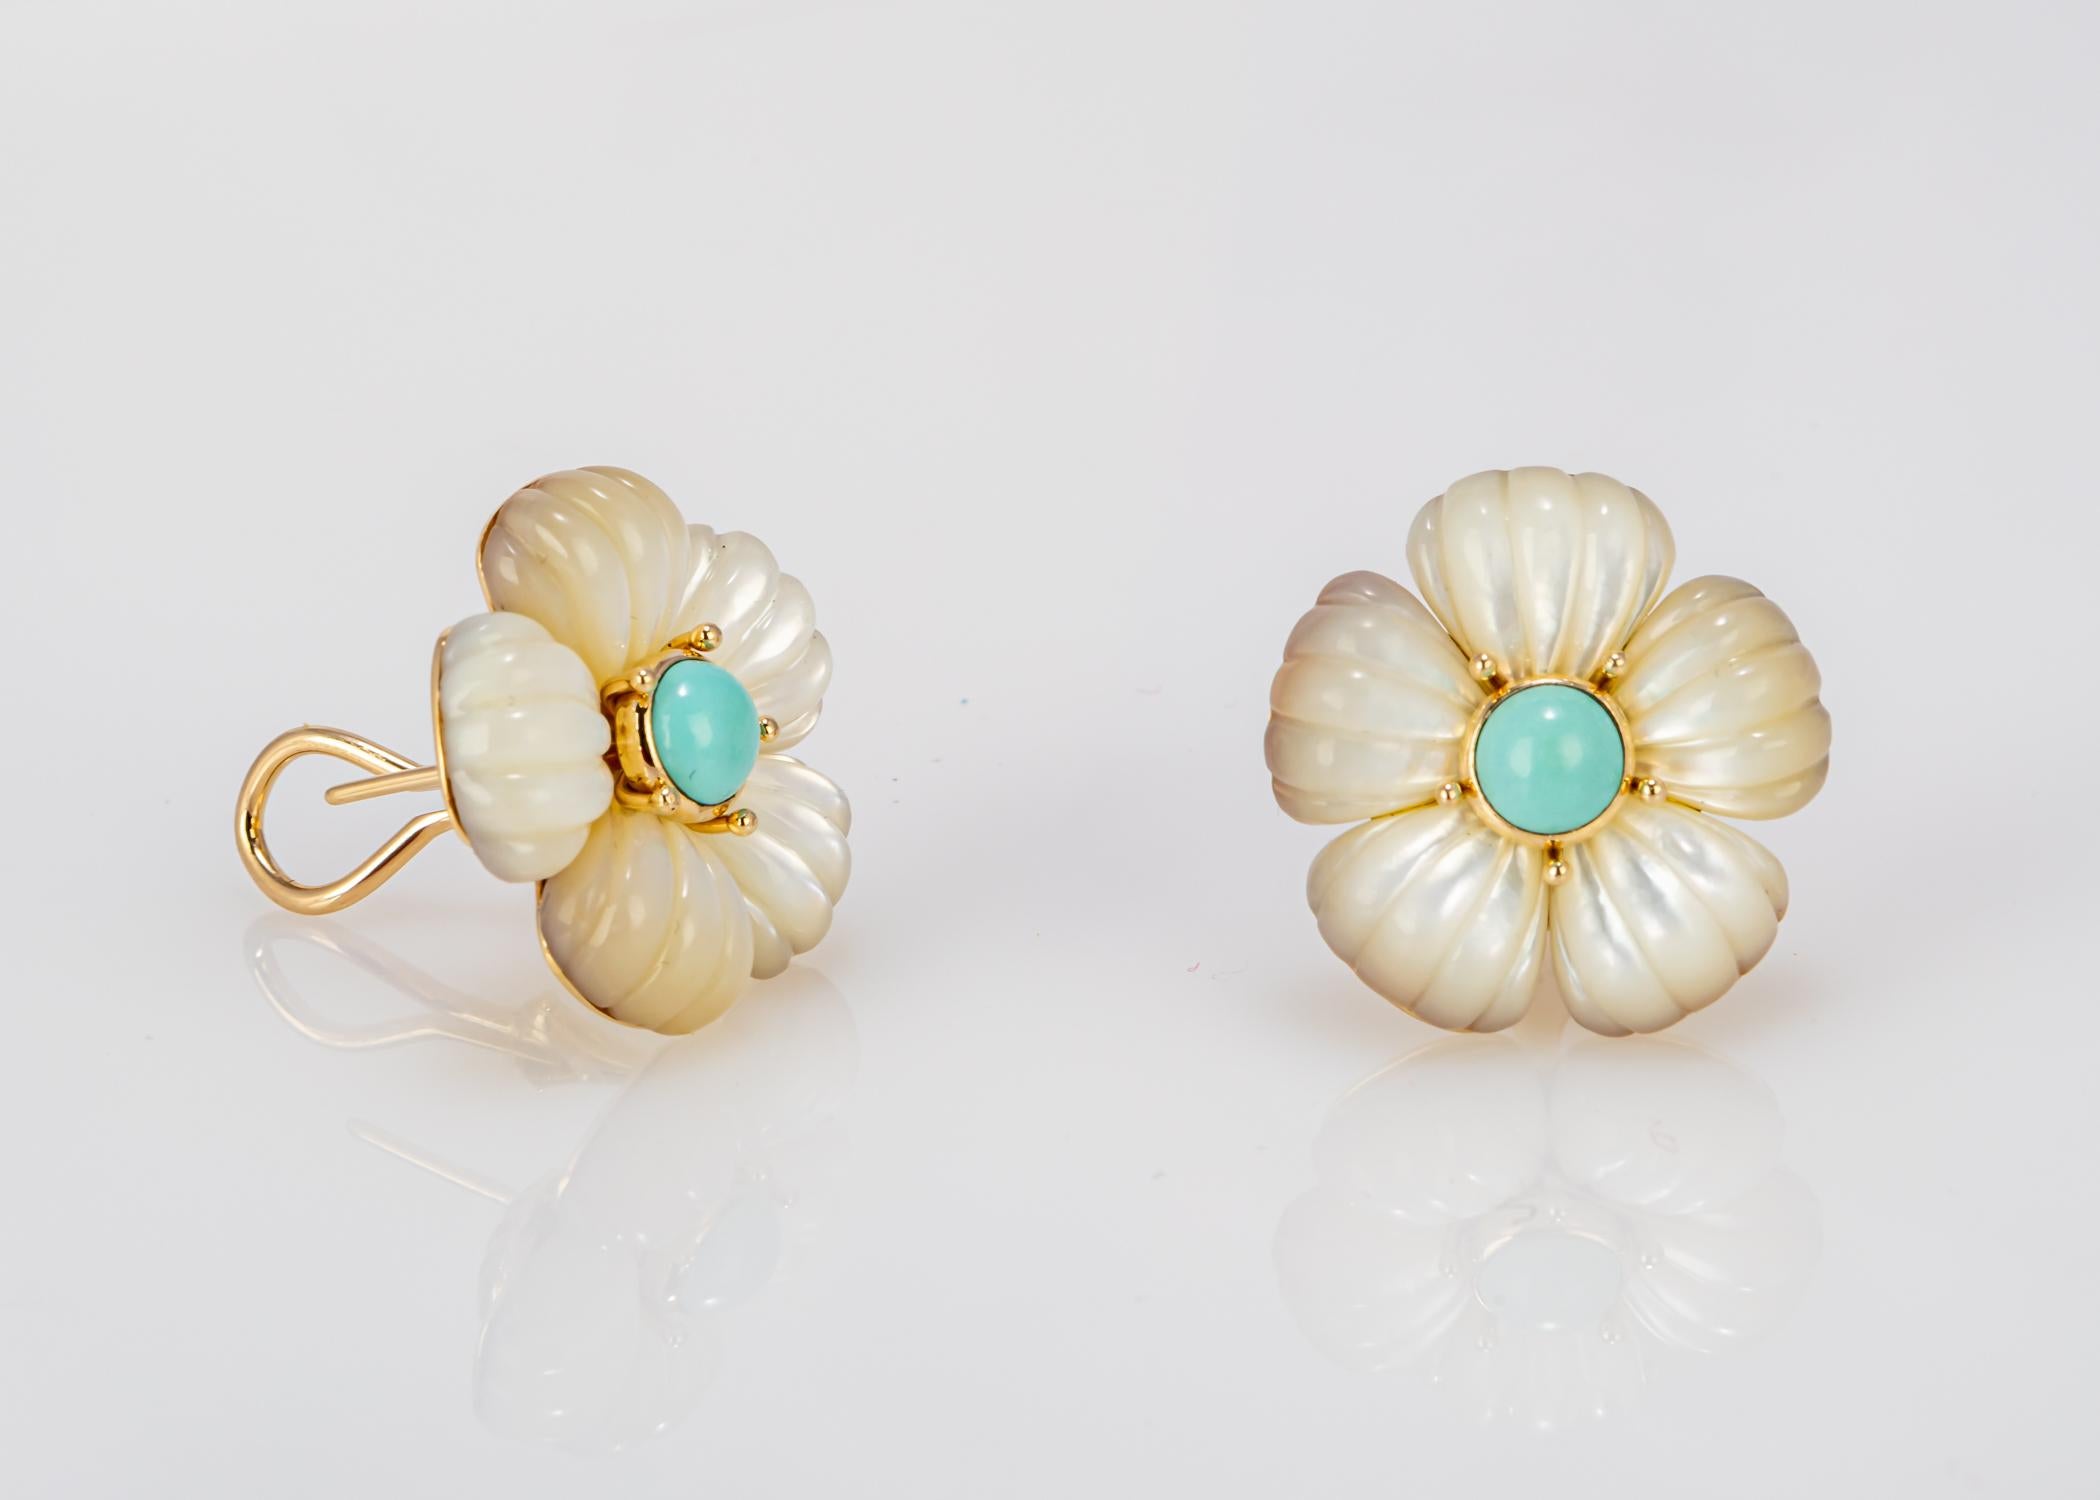 MAZ is known for designs that celebrate beautifully carved stones. The mother of pearl petals and accented with bright turquoise centers. At 1 inch in size this chic pair of earrings will go from daytime to evening.